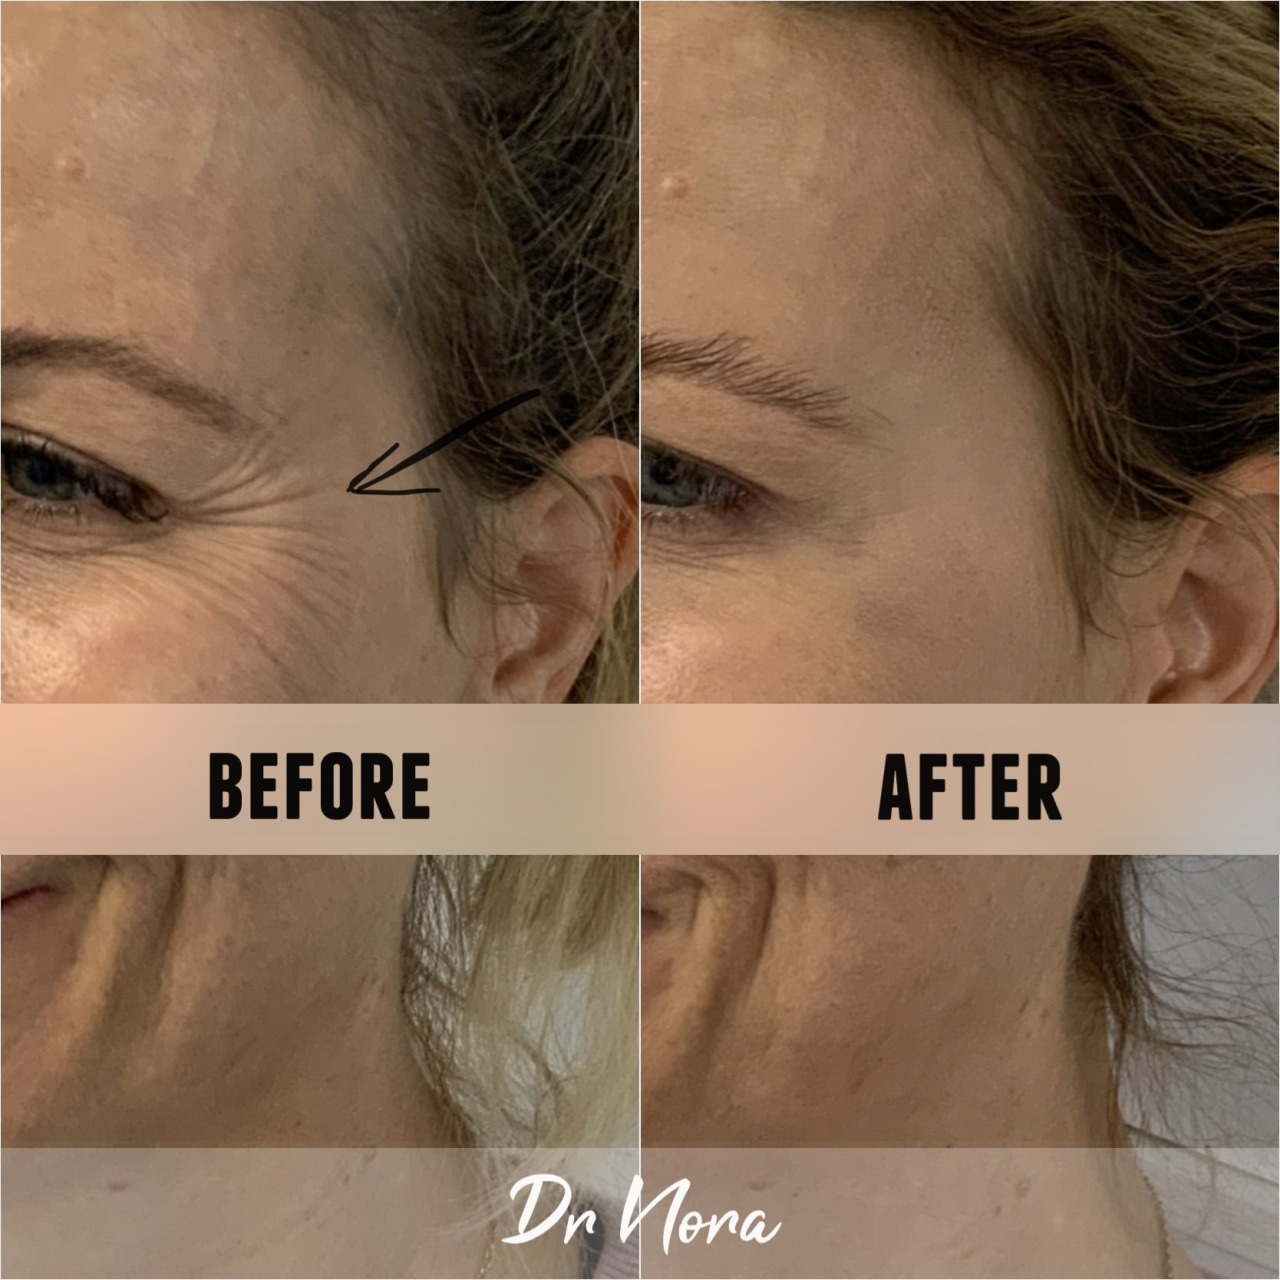 Anti-wrinkle treatment of smile lines ðŸ˜†Anti-wrinkle therapy is a way to reduce the appearance of strong and deep lines around the eyes. Treatment time is 15 minutes, optimal results are seen at 2 weeks and lasts up to 3-5 months.
If you have any...